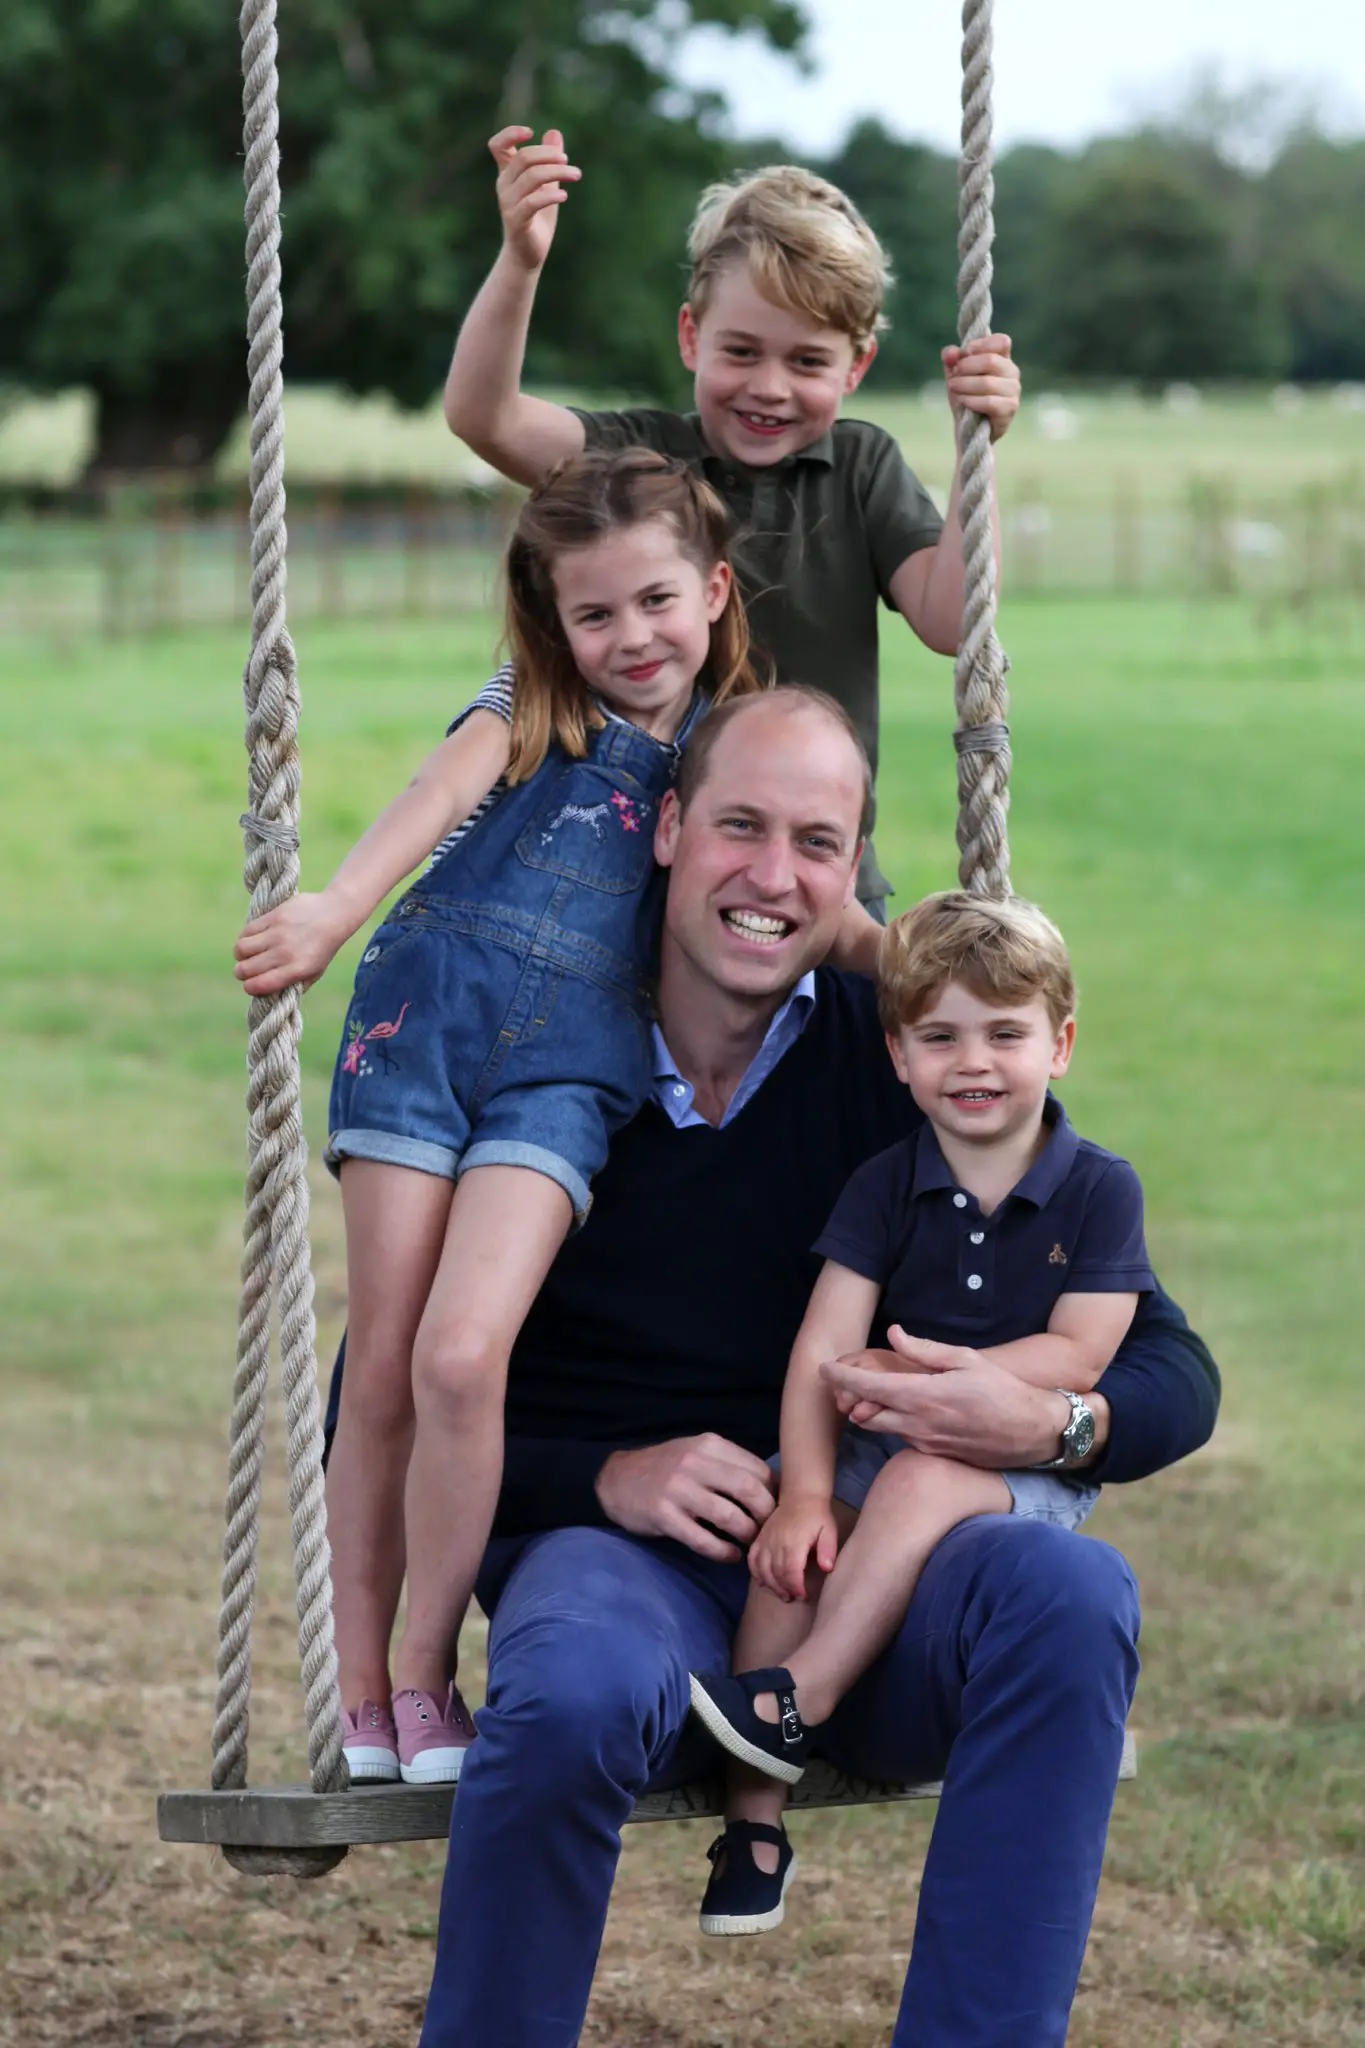 The Duke of Cambridge marked his 38th birhday with two family pictures with prince George, Princess Charlotte and Prince Louis